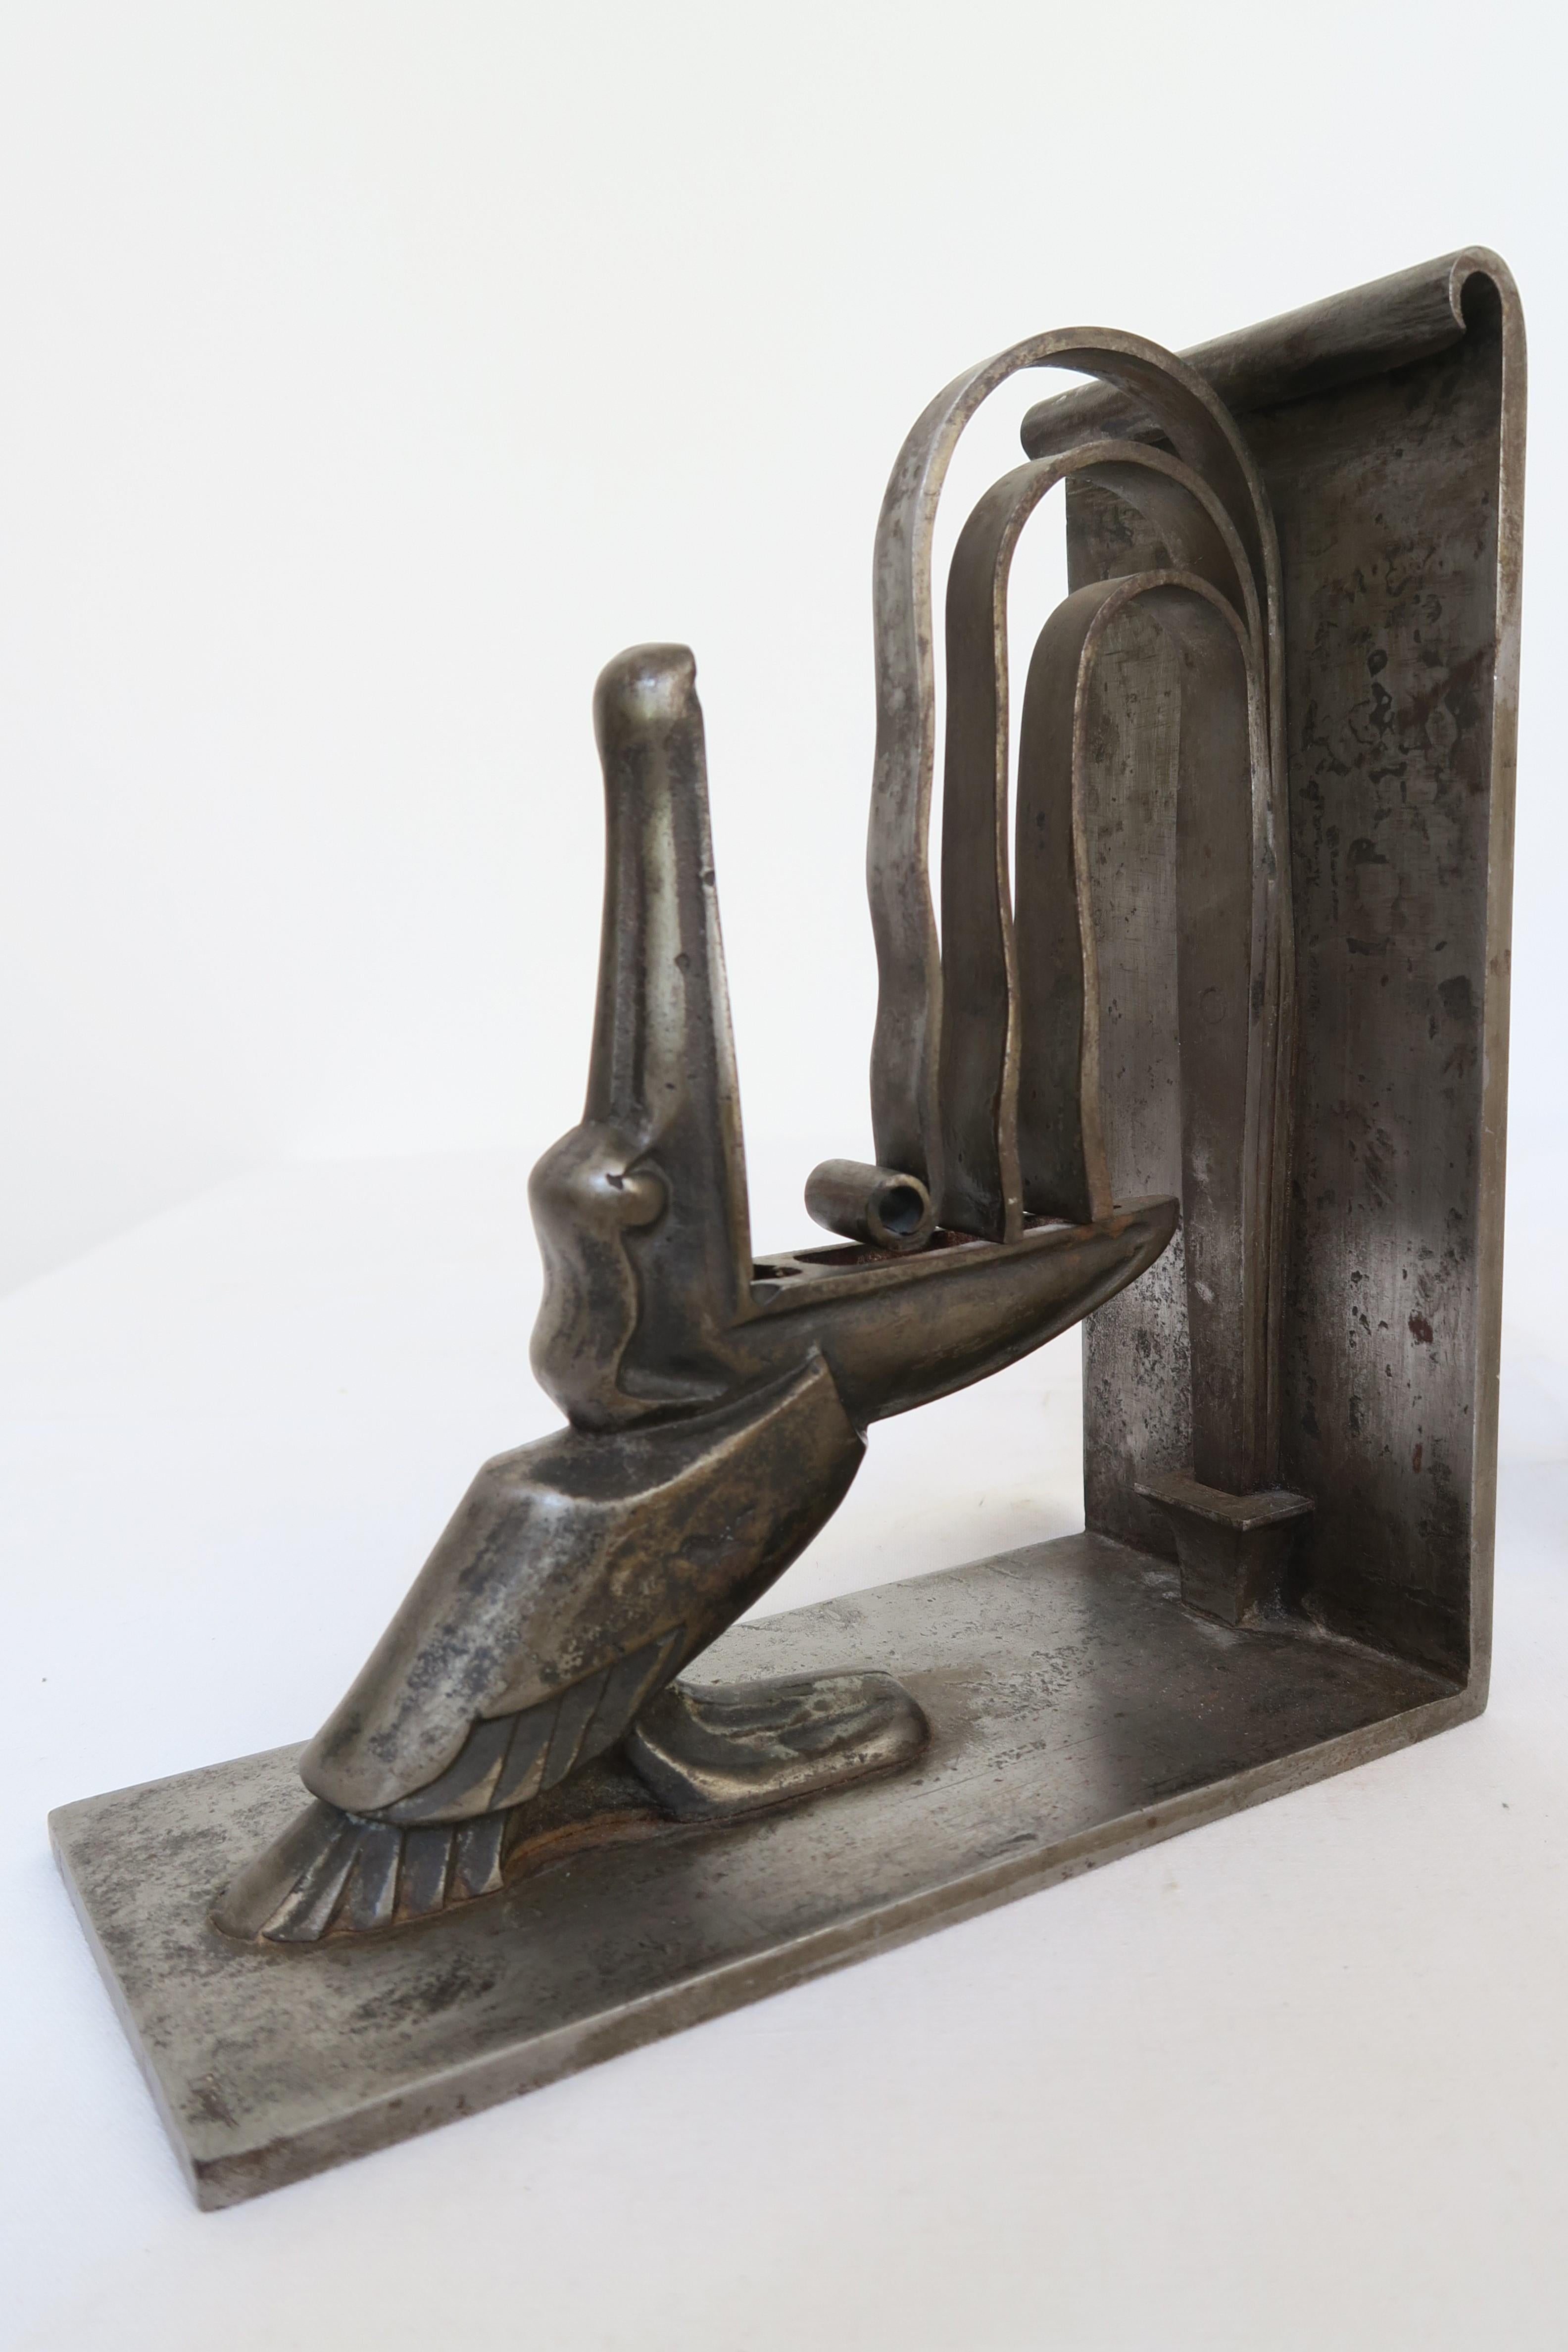 Hand-Crafted Art Deco Wrought Iron Bookends with Pelican Motif by Edgar Brandt 